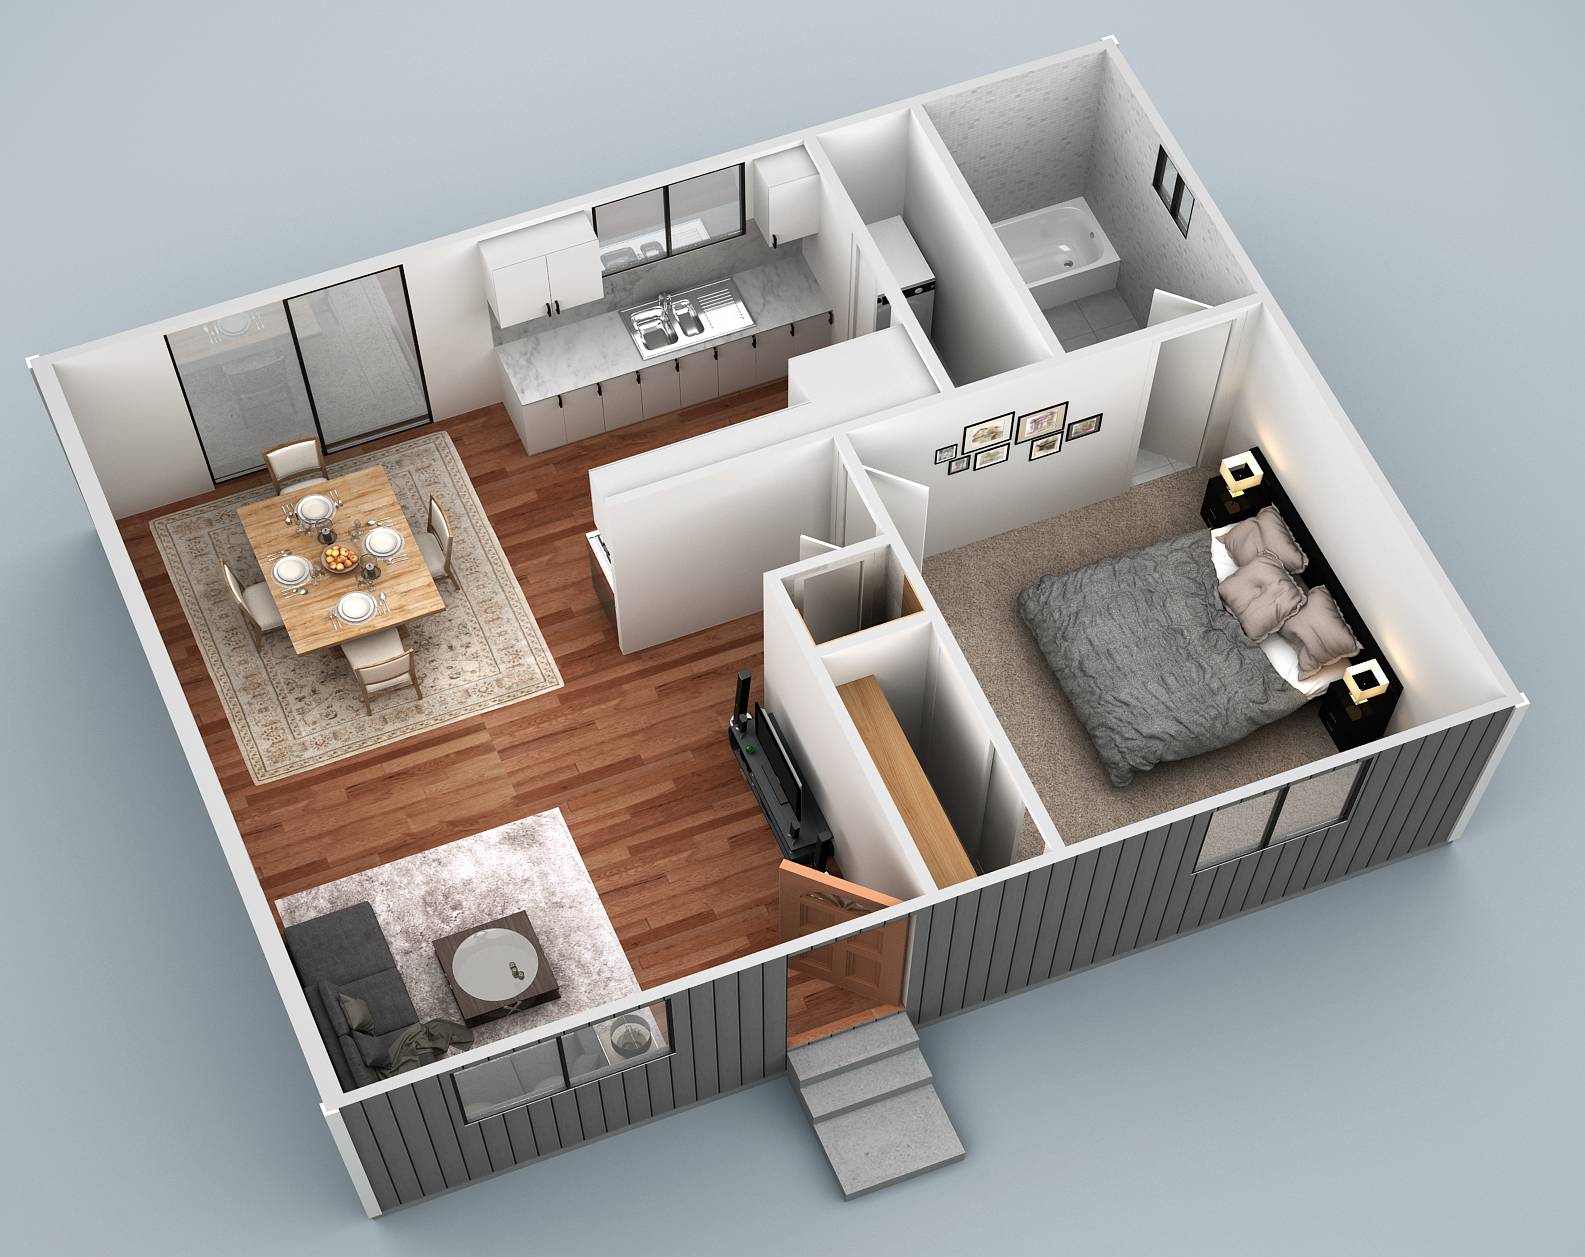 Discover Your Dream Home: Build a Stunning New Residence with Austral Constructions